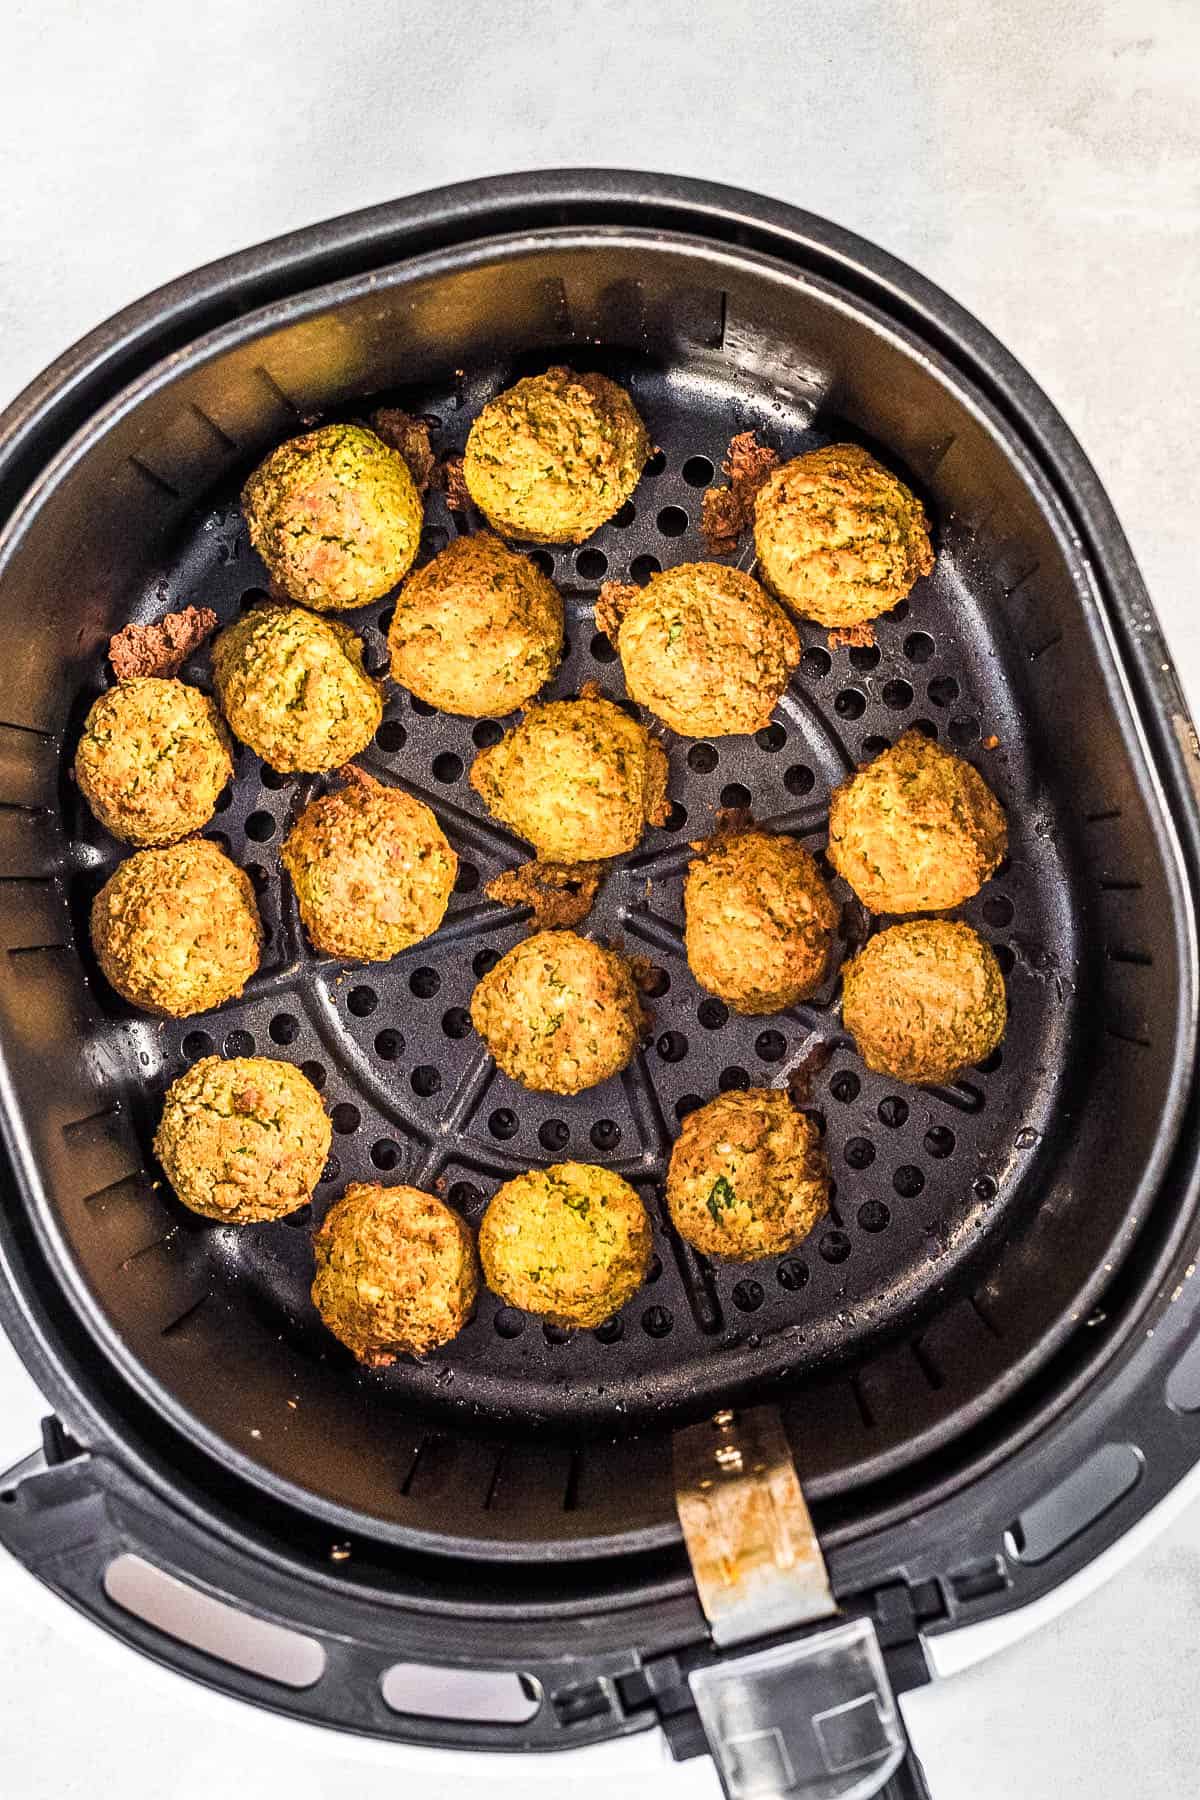 An air fryer filled with fried falafel.